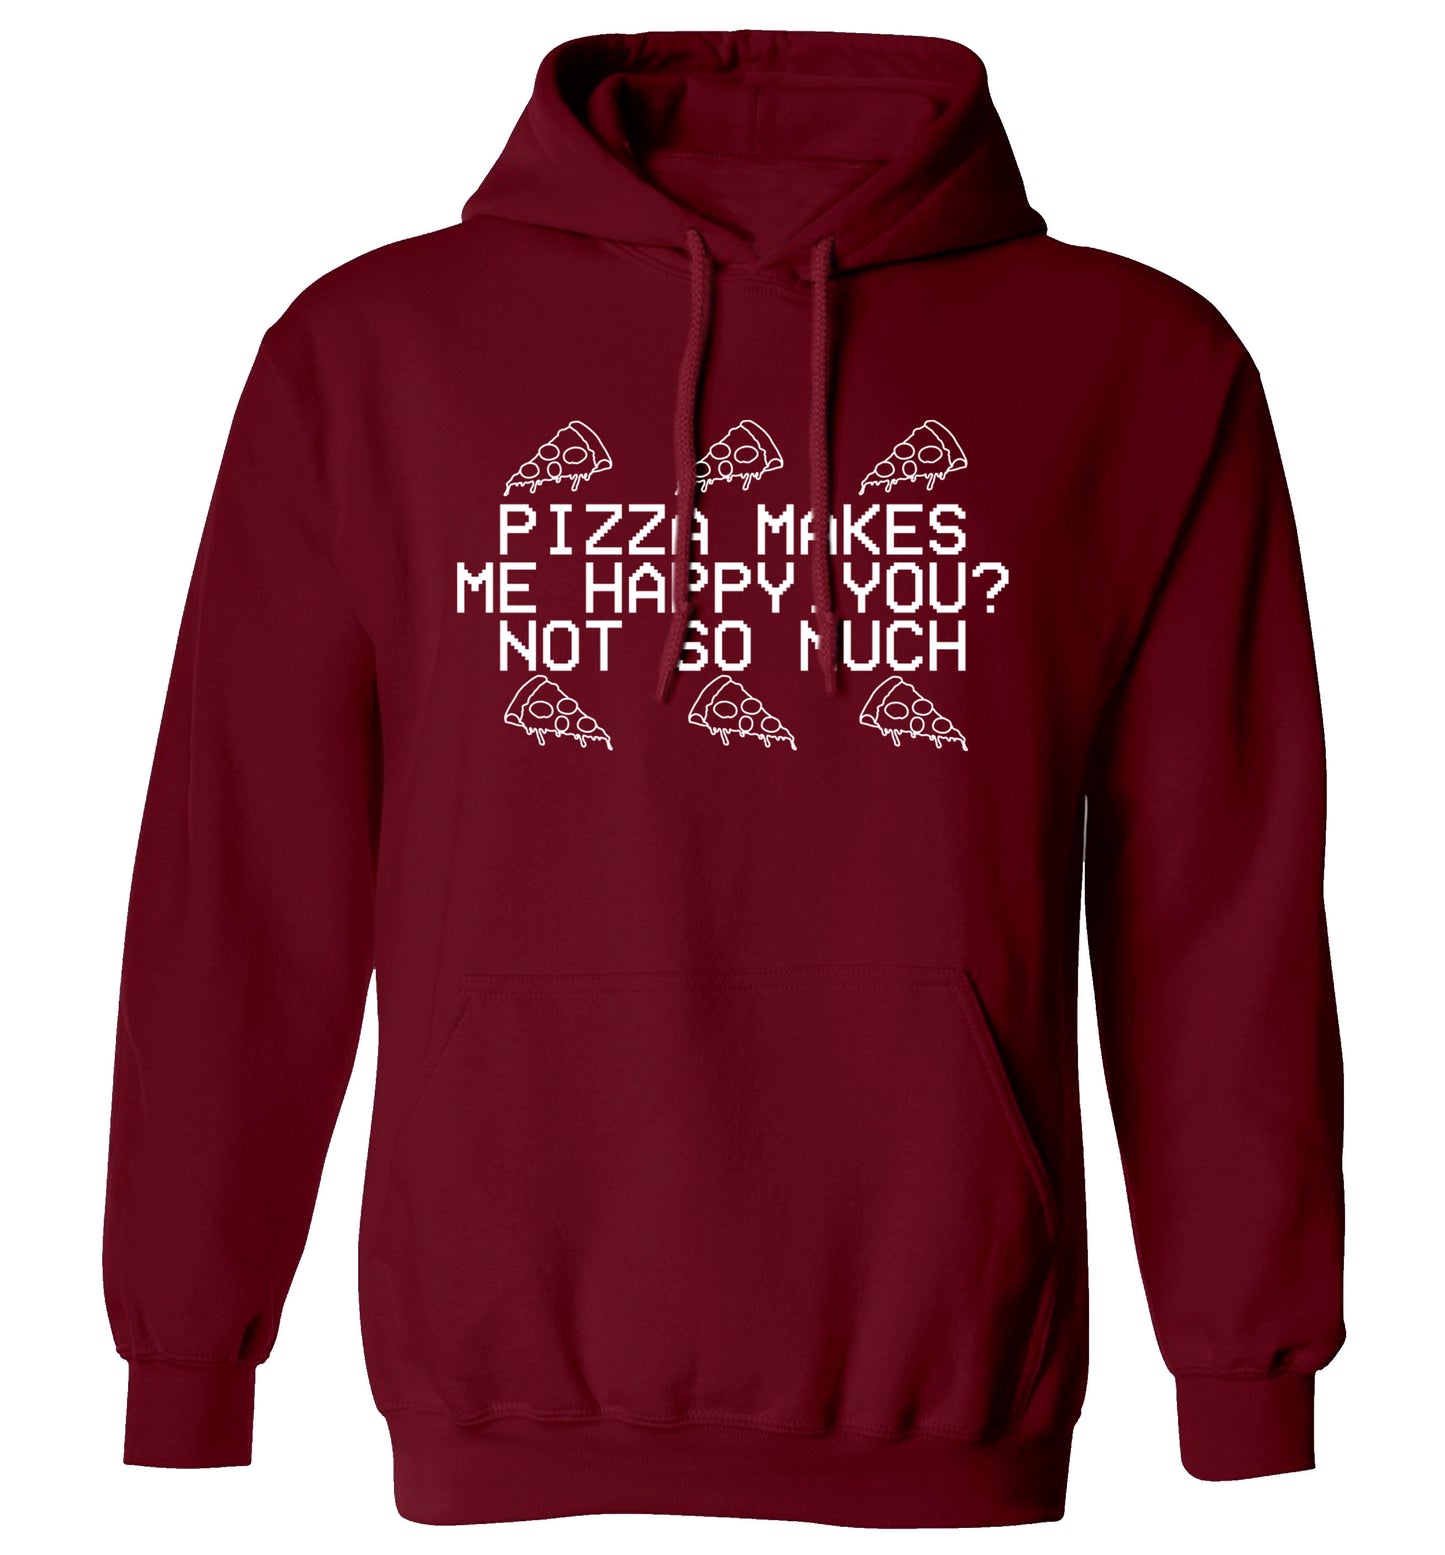 Pizza makes me happy, You? Not so much adults unisex maroon hoodie 2XL